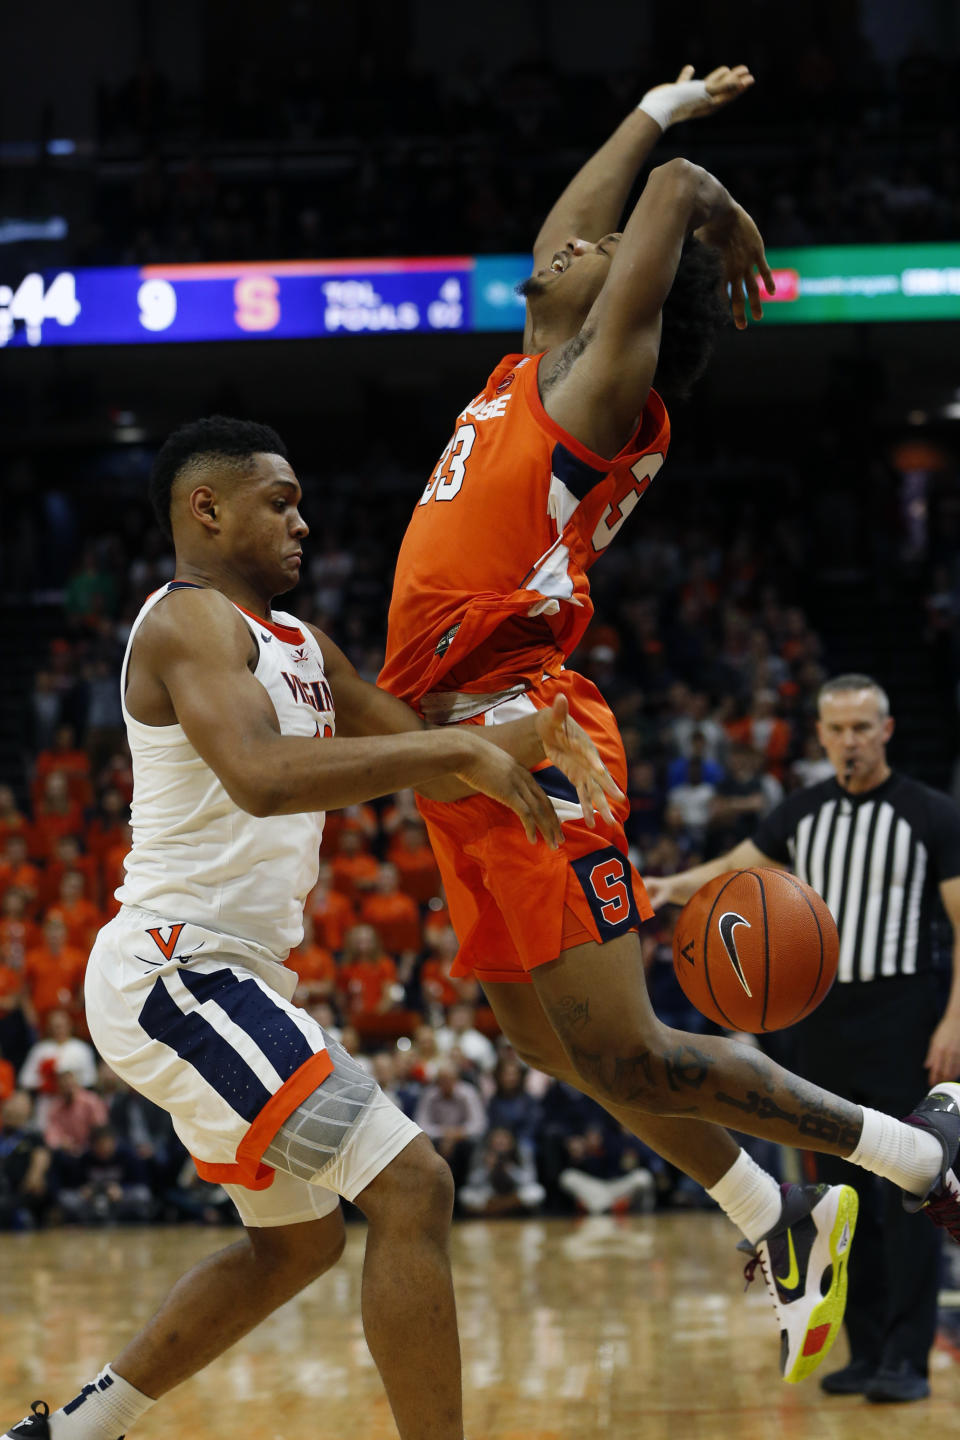 Syracuse forward Elijah Hughes (33) looses the ball as Virginia guard Casey Morsell (13) defends during the first half of an NCAA college basketball game in Charlottesville, Va., Saturday, Jan. 11, 2020. Morsell ws called for a four on the play. (AP Photo/Steve Helber)